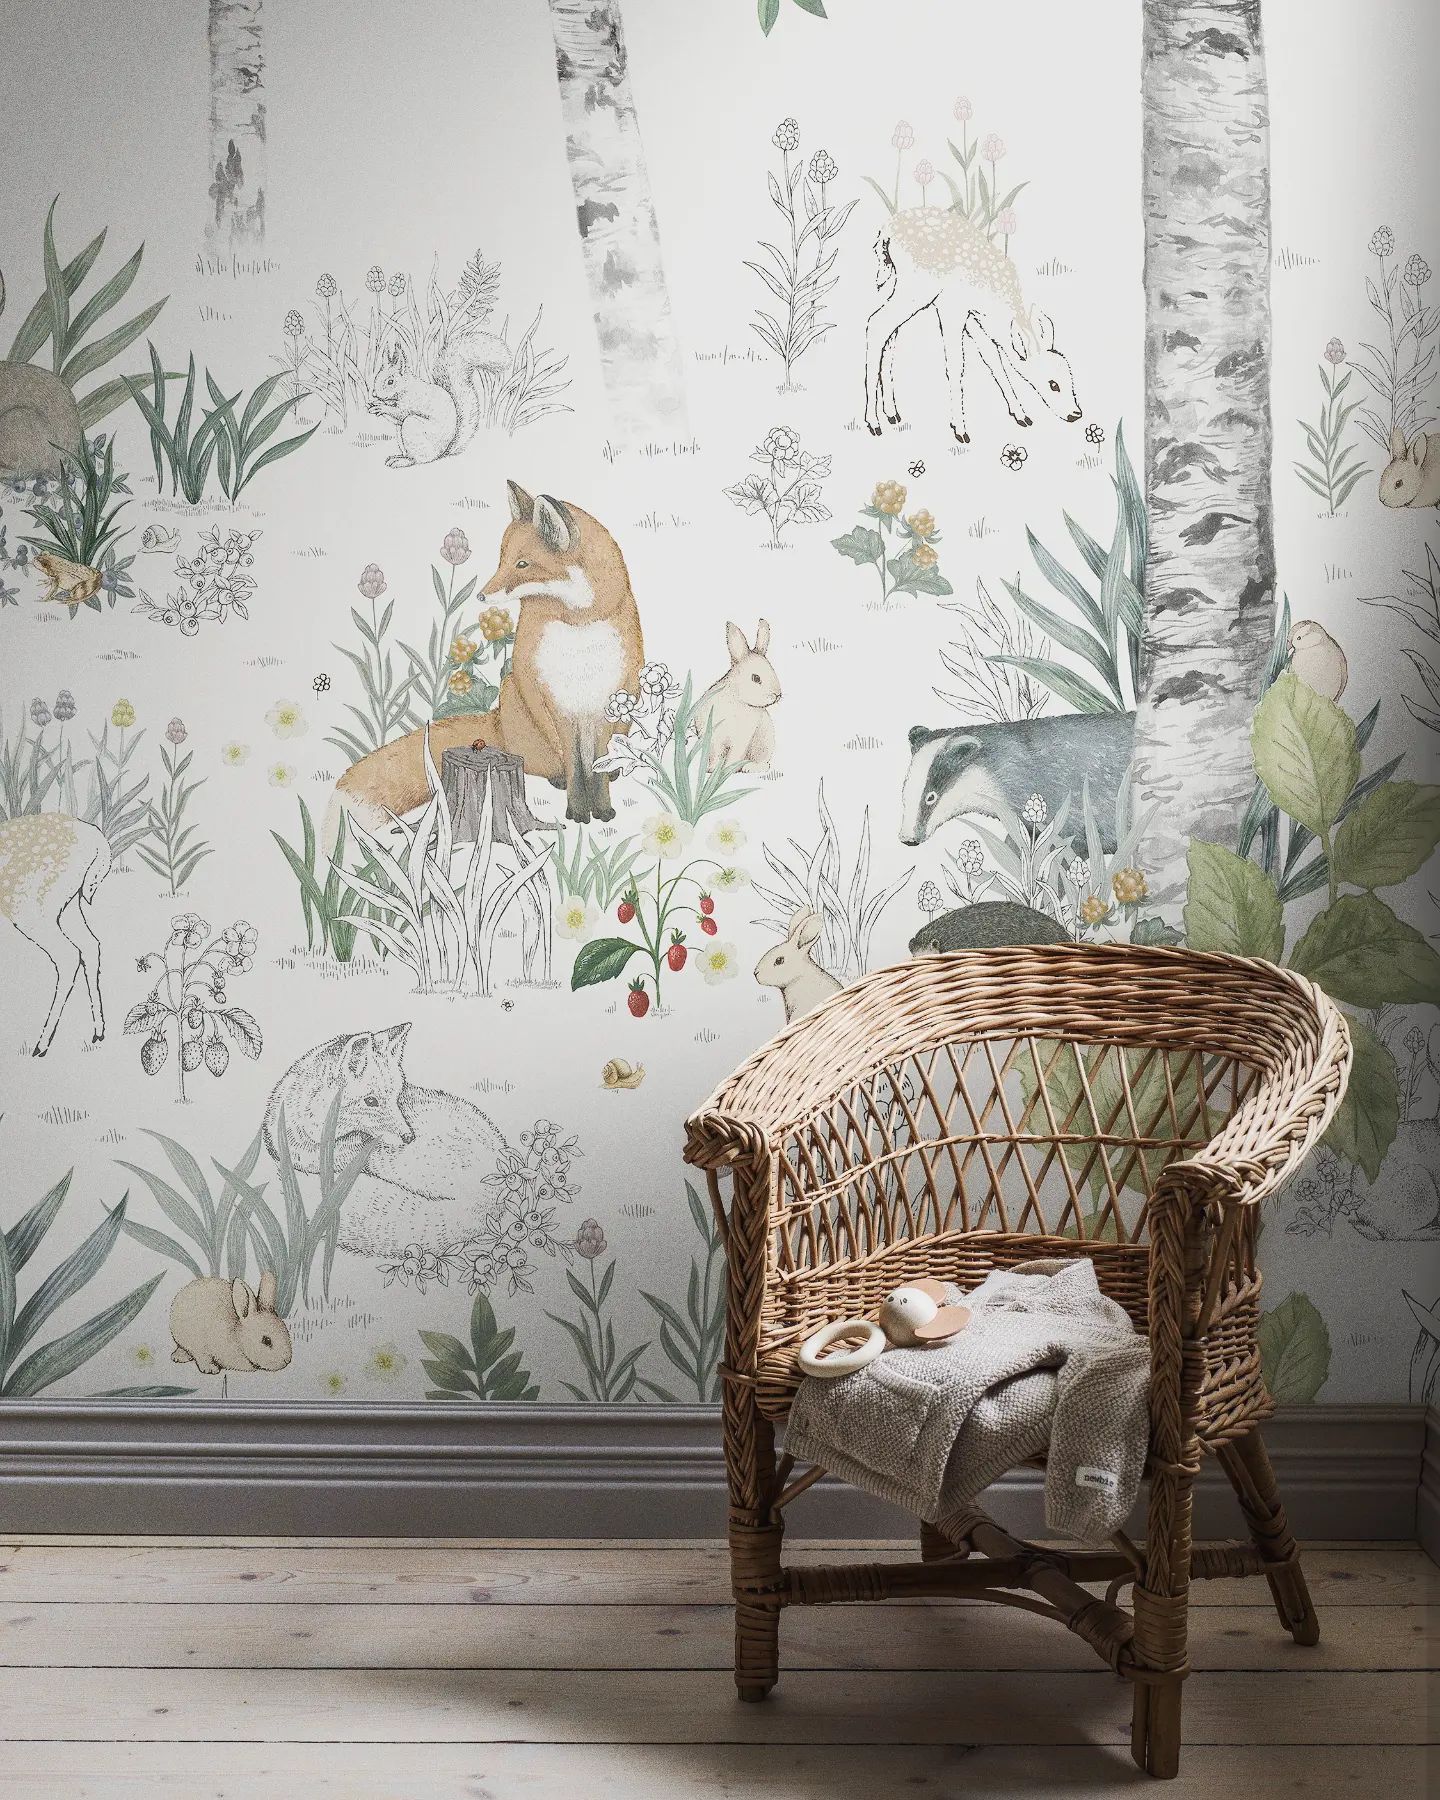 Come and explore the enchanted forest! Where sparrows, squirrels, rabbits peek out through the tall trees and lush flowers. 

🐰 Magic Forest Mural

This mural is supplied on a W:45cm x L:2.65m roll, in 6 panels. Total size of mural is 2.7m x 2.65m.

Available to order today in-store and online at stillorgandecor.ie for delivery nationwide.

Tap the picture for details.